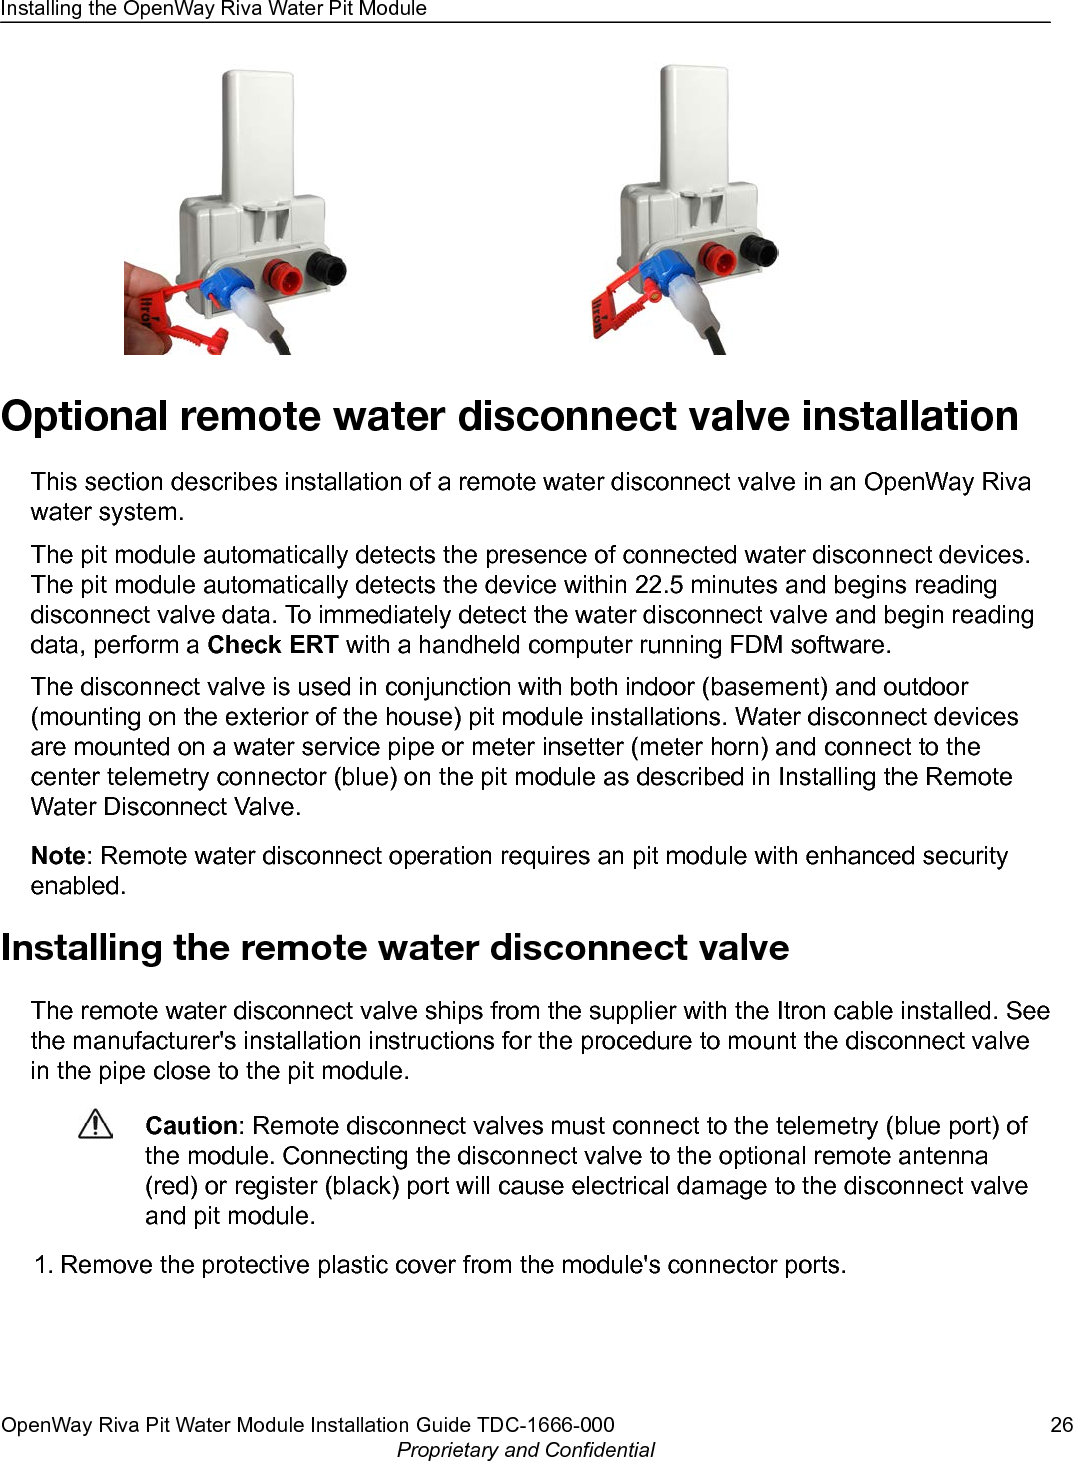 Optional remote water disconnect valve installationThis section describes installation of a remote water disconnect valve in an OpenWay Rivawater system.The pit module automatically detects the presence of connected water disconnect devices.The pit module automatically detects the device within 22.5 minutes and begins readingdisconnect valve data. To immediately detect the water disconnect valve and begin readingdata, perform a Check ERT with a handheld computer running FDM software.The disconnect valve is used in conjunction with both indoor (basement) and outdoor(mounting on the exterior of the house) pit module installations. Water disconnect devicesare mounted on a water service pipe or meter insetter (meter horn) and connect to thecenter telemetry connector (blue) on the pit module as described in Installing the RemoteWater Disconnect Valve.Note: Remote water disconnect operation requires an pit module with enhanced securityenabled.Installing the remote water disconnect valveThe remote water disconnect valve ships from the supplier with the Itron cable installed. Seethe manufacturer&apos;s installation instructions for the procedure to mount the disconnect valvein the pipe close to the pit module.Caution: Remote disconnect valves must connect to the telemetry (blue port) ofthe module. Connecting the disconnect valve to the optional remote antenna(red) or register (black) port will cause electrical damage to the disconnect valveand pit module.1. Remove the protective plastic cover from the module&apos;s connector ports.Installing the OpenWay Riva Water Pit ModuleOpenWay Riva Pit Water Module Installation Guide TDC-1666-000 26Proprietary and Confidential